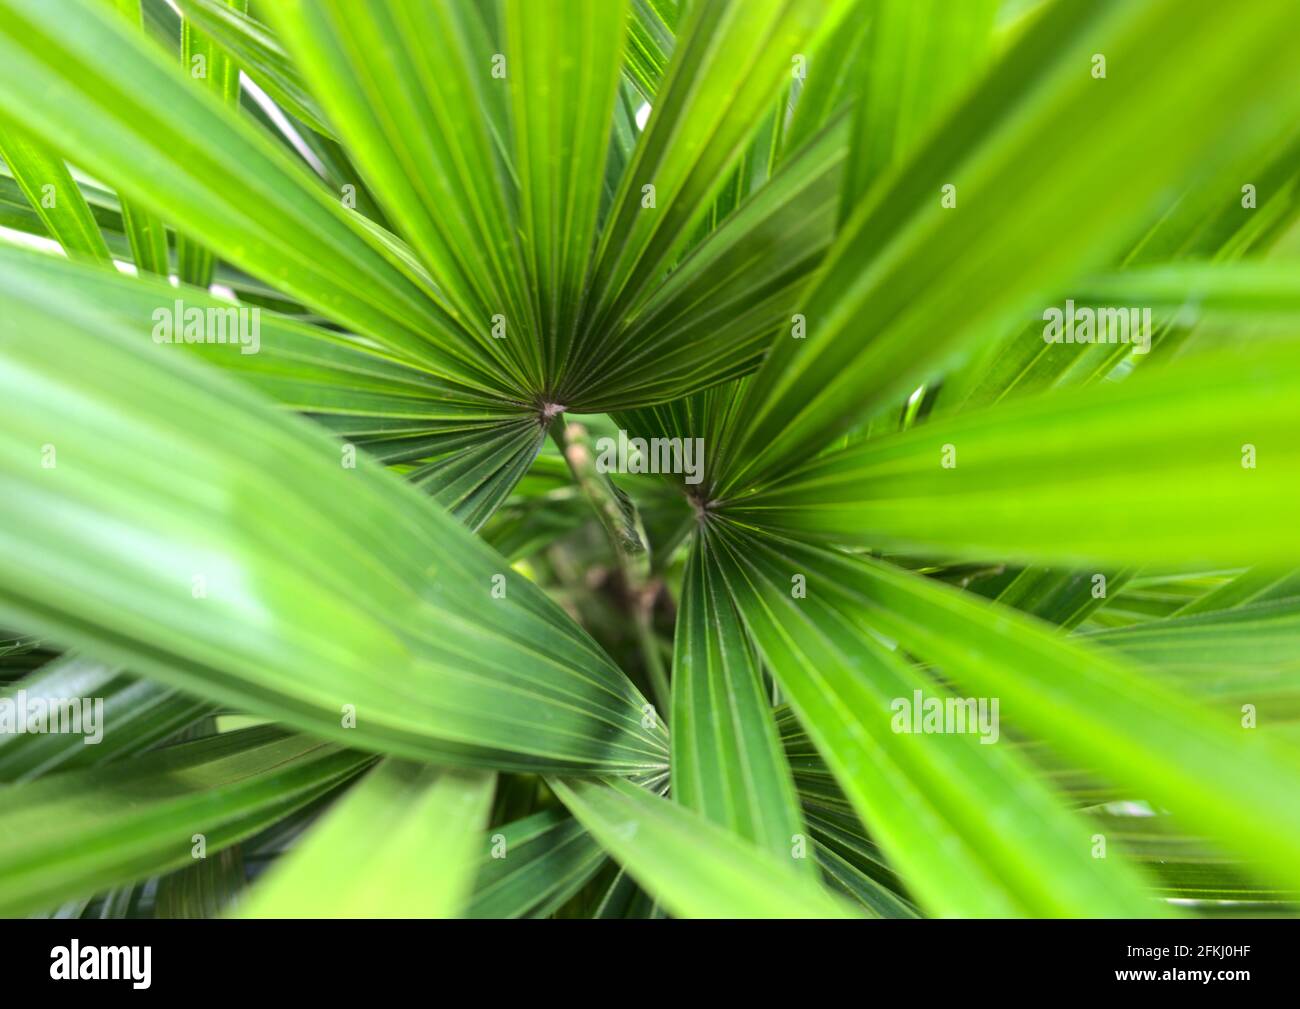 Natural tropical green palm tree leaves. Texture abstract background. Macro nature backdrop. Close-up. Tangled, muddled nature photography. Stock Photo